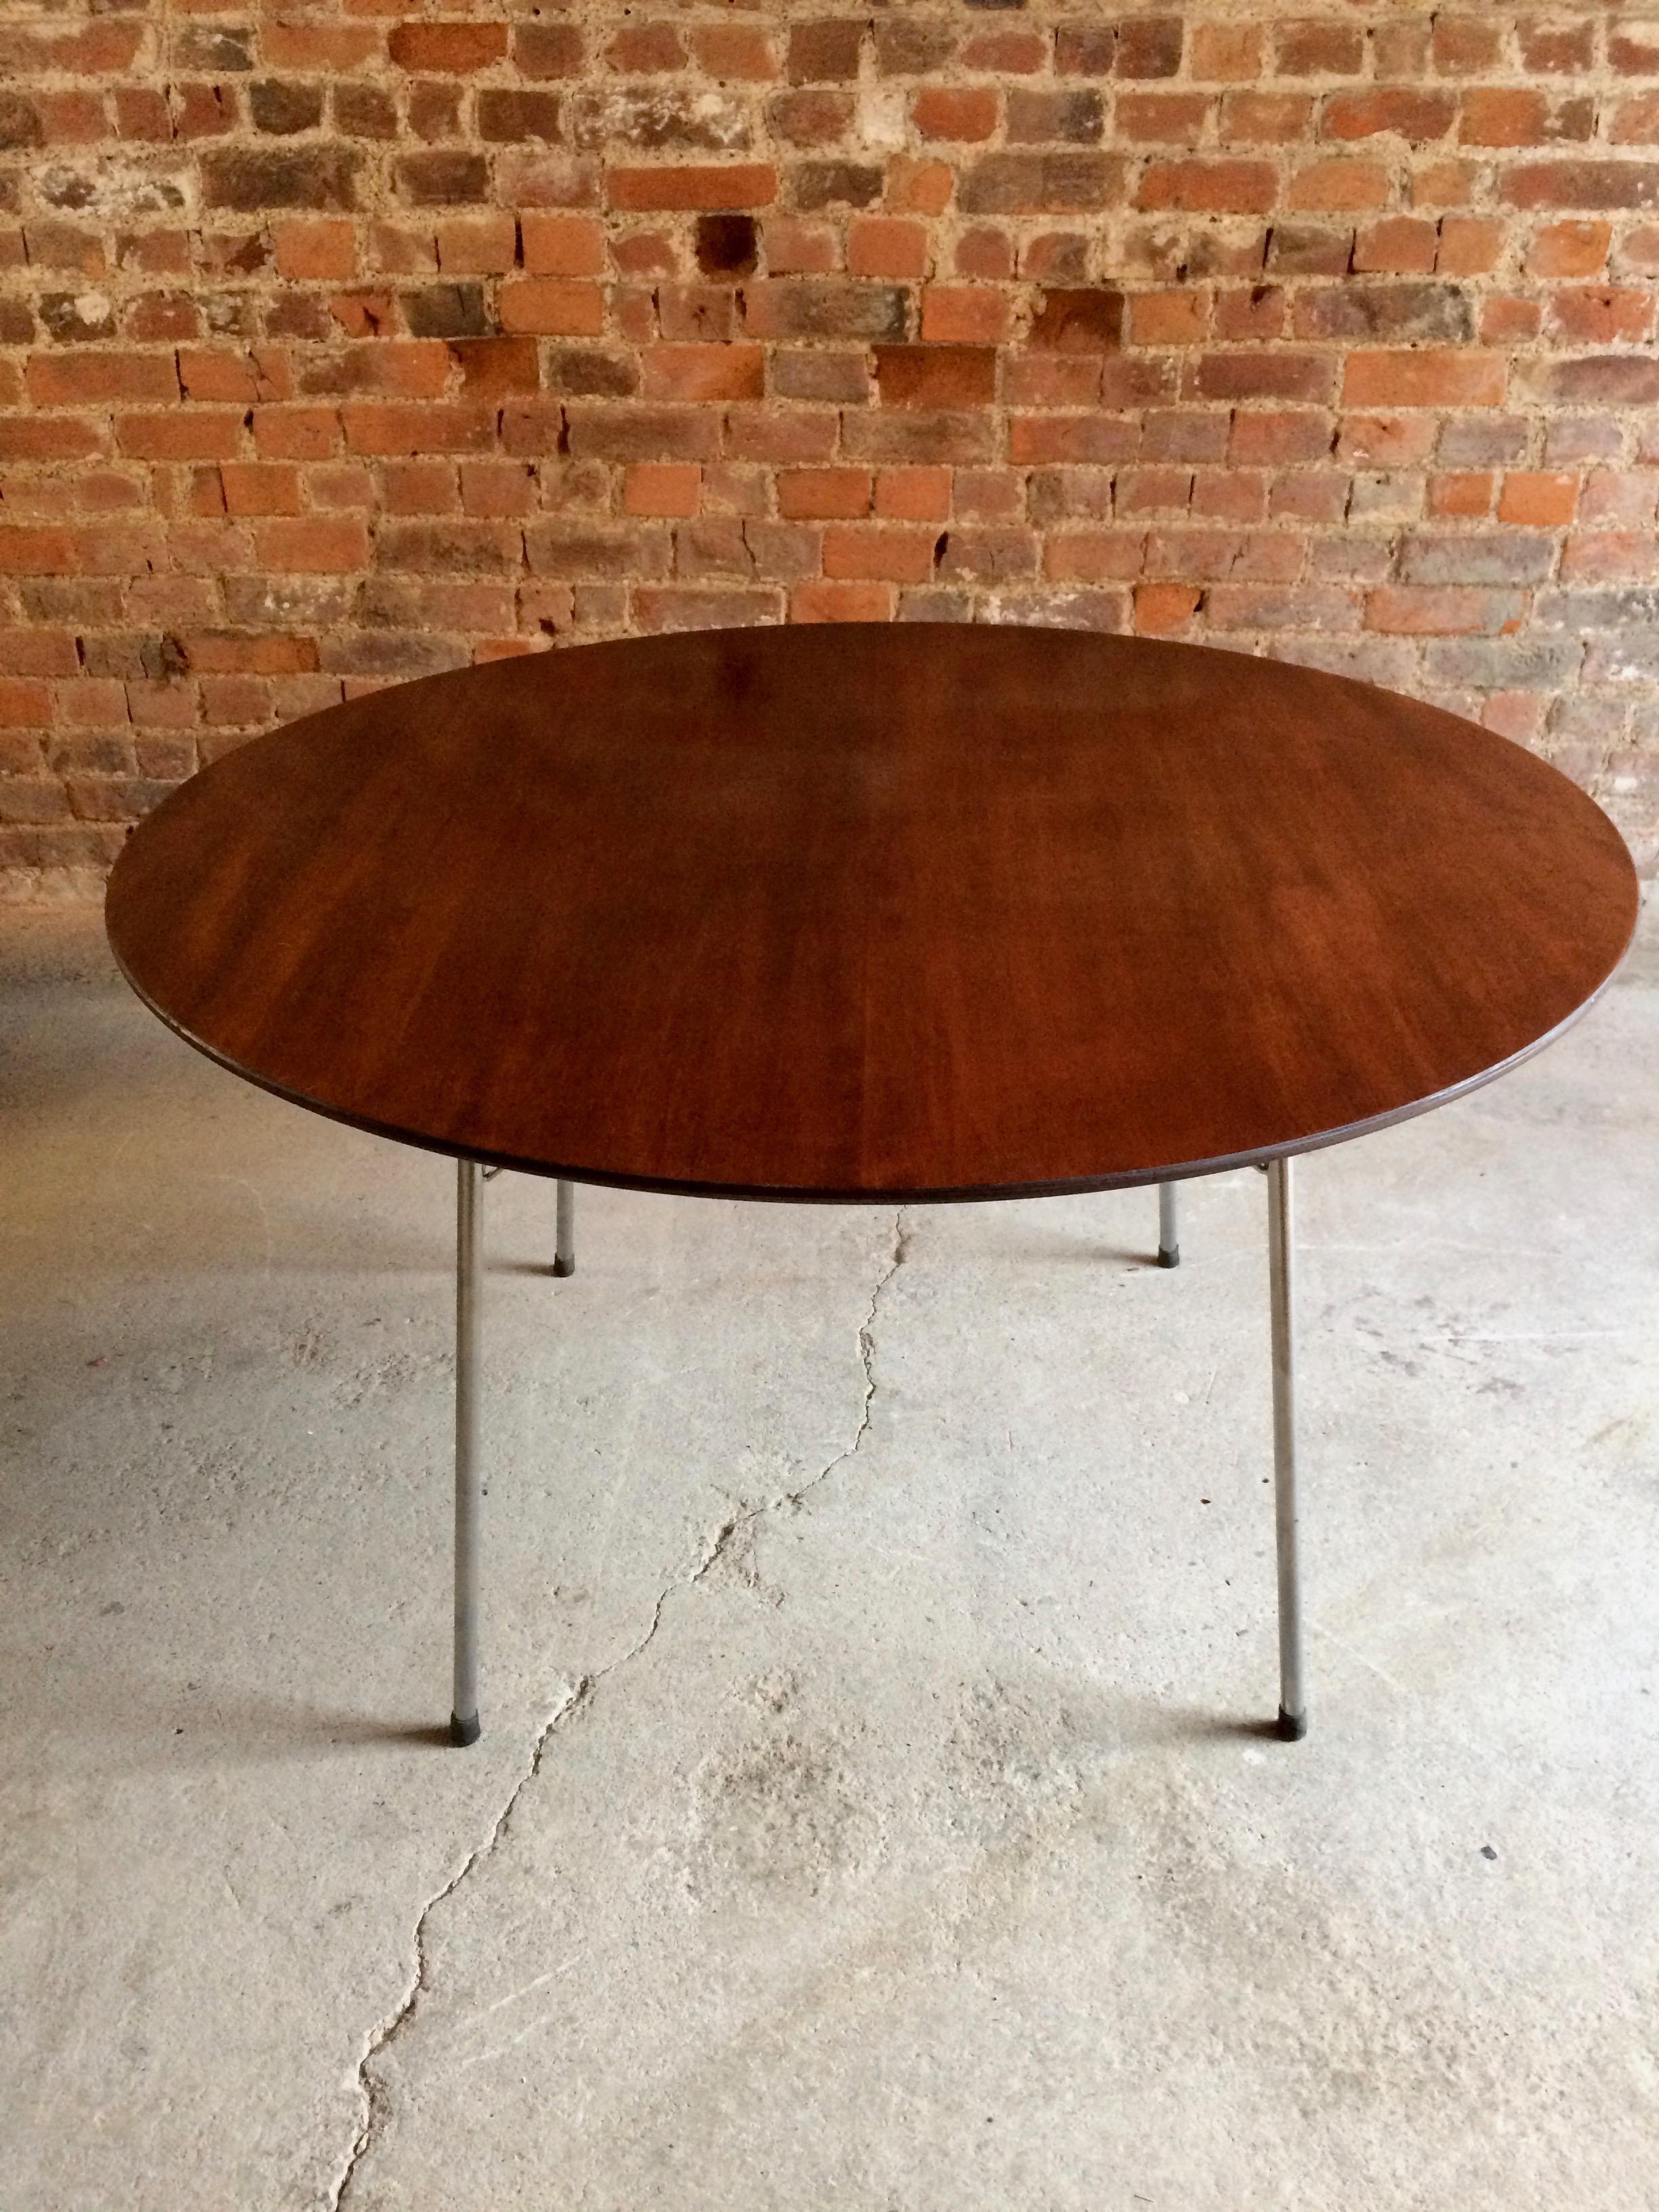 Arne Jacobsen Table and Four Ant Chairs Danish 1950s Midcentury Fritz Hansen 2